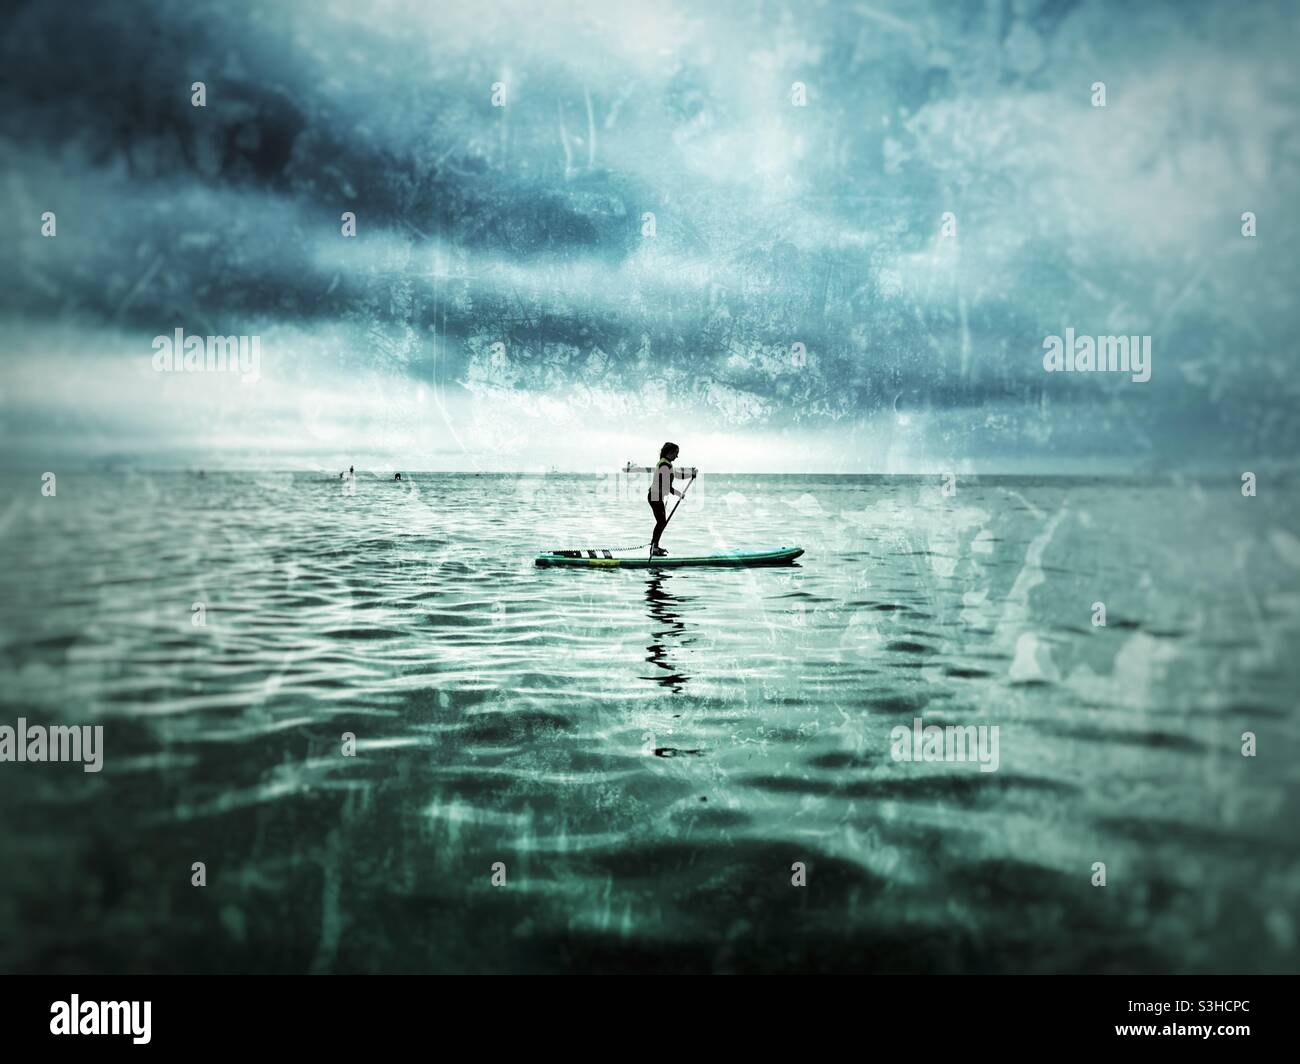 Young woman SUP boarding on the ocean. Boat in the distance. Stock Photo